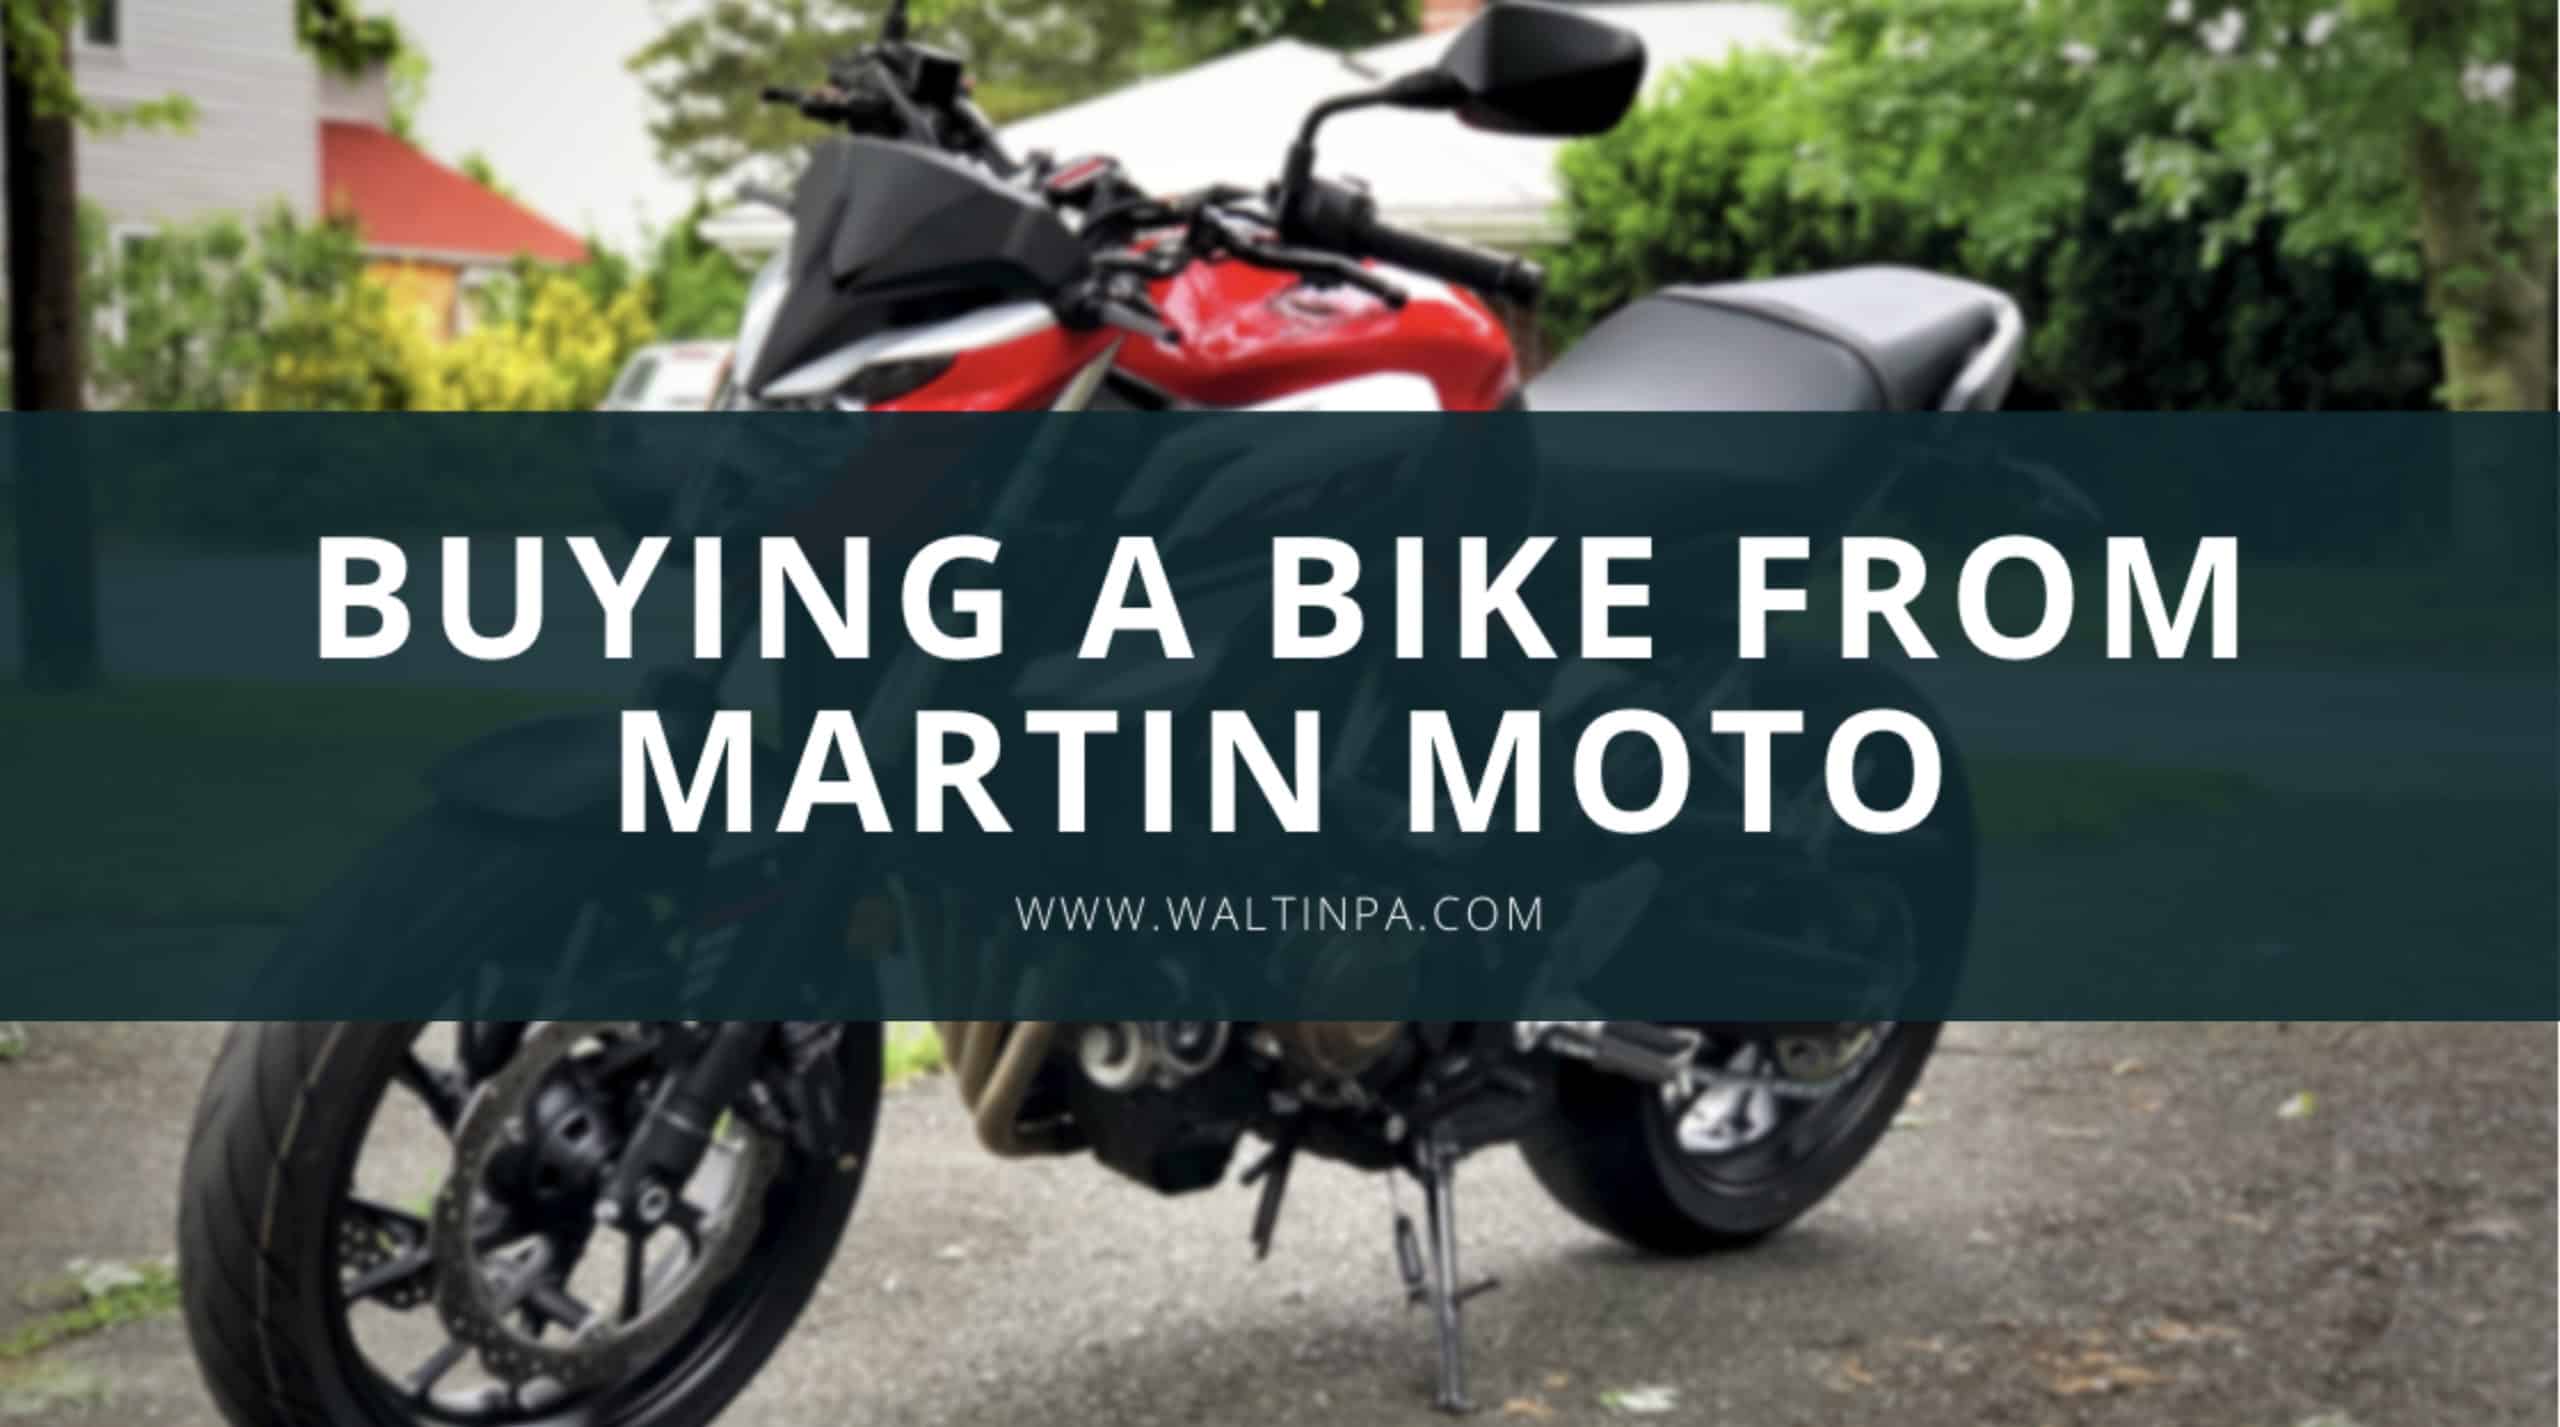 Buying a Motorcycle from Martin Moto